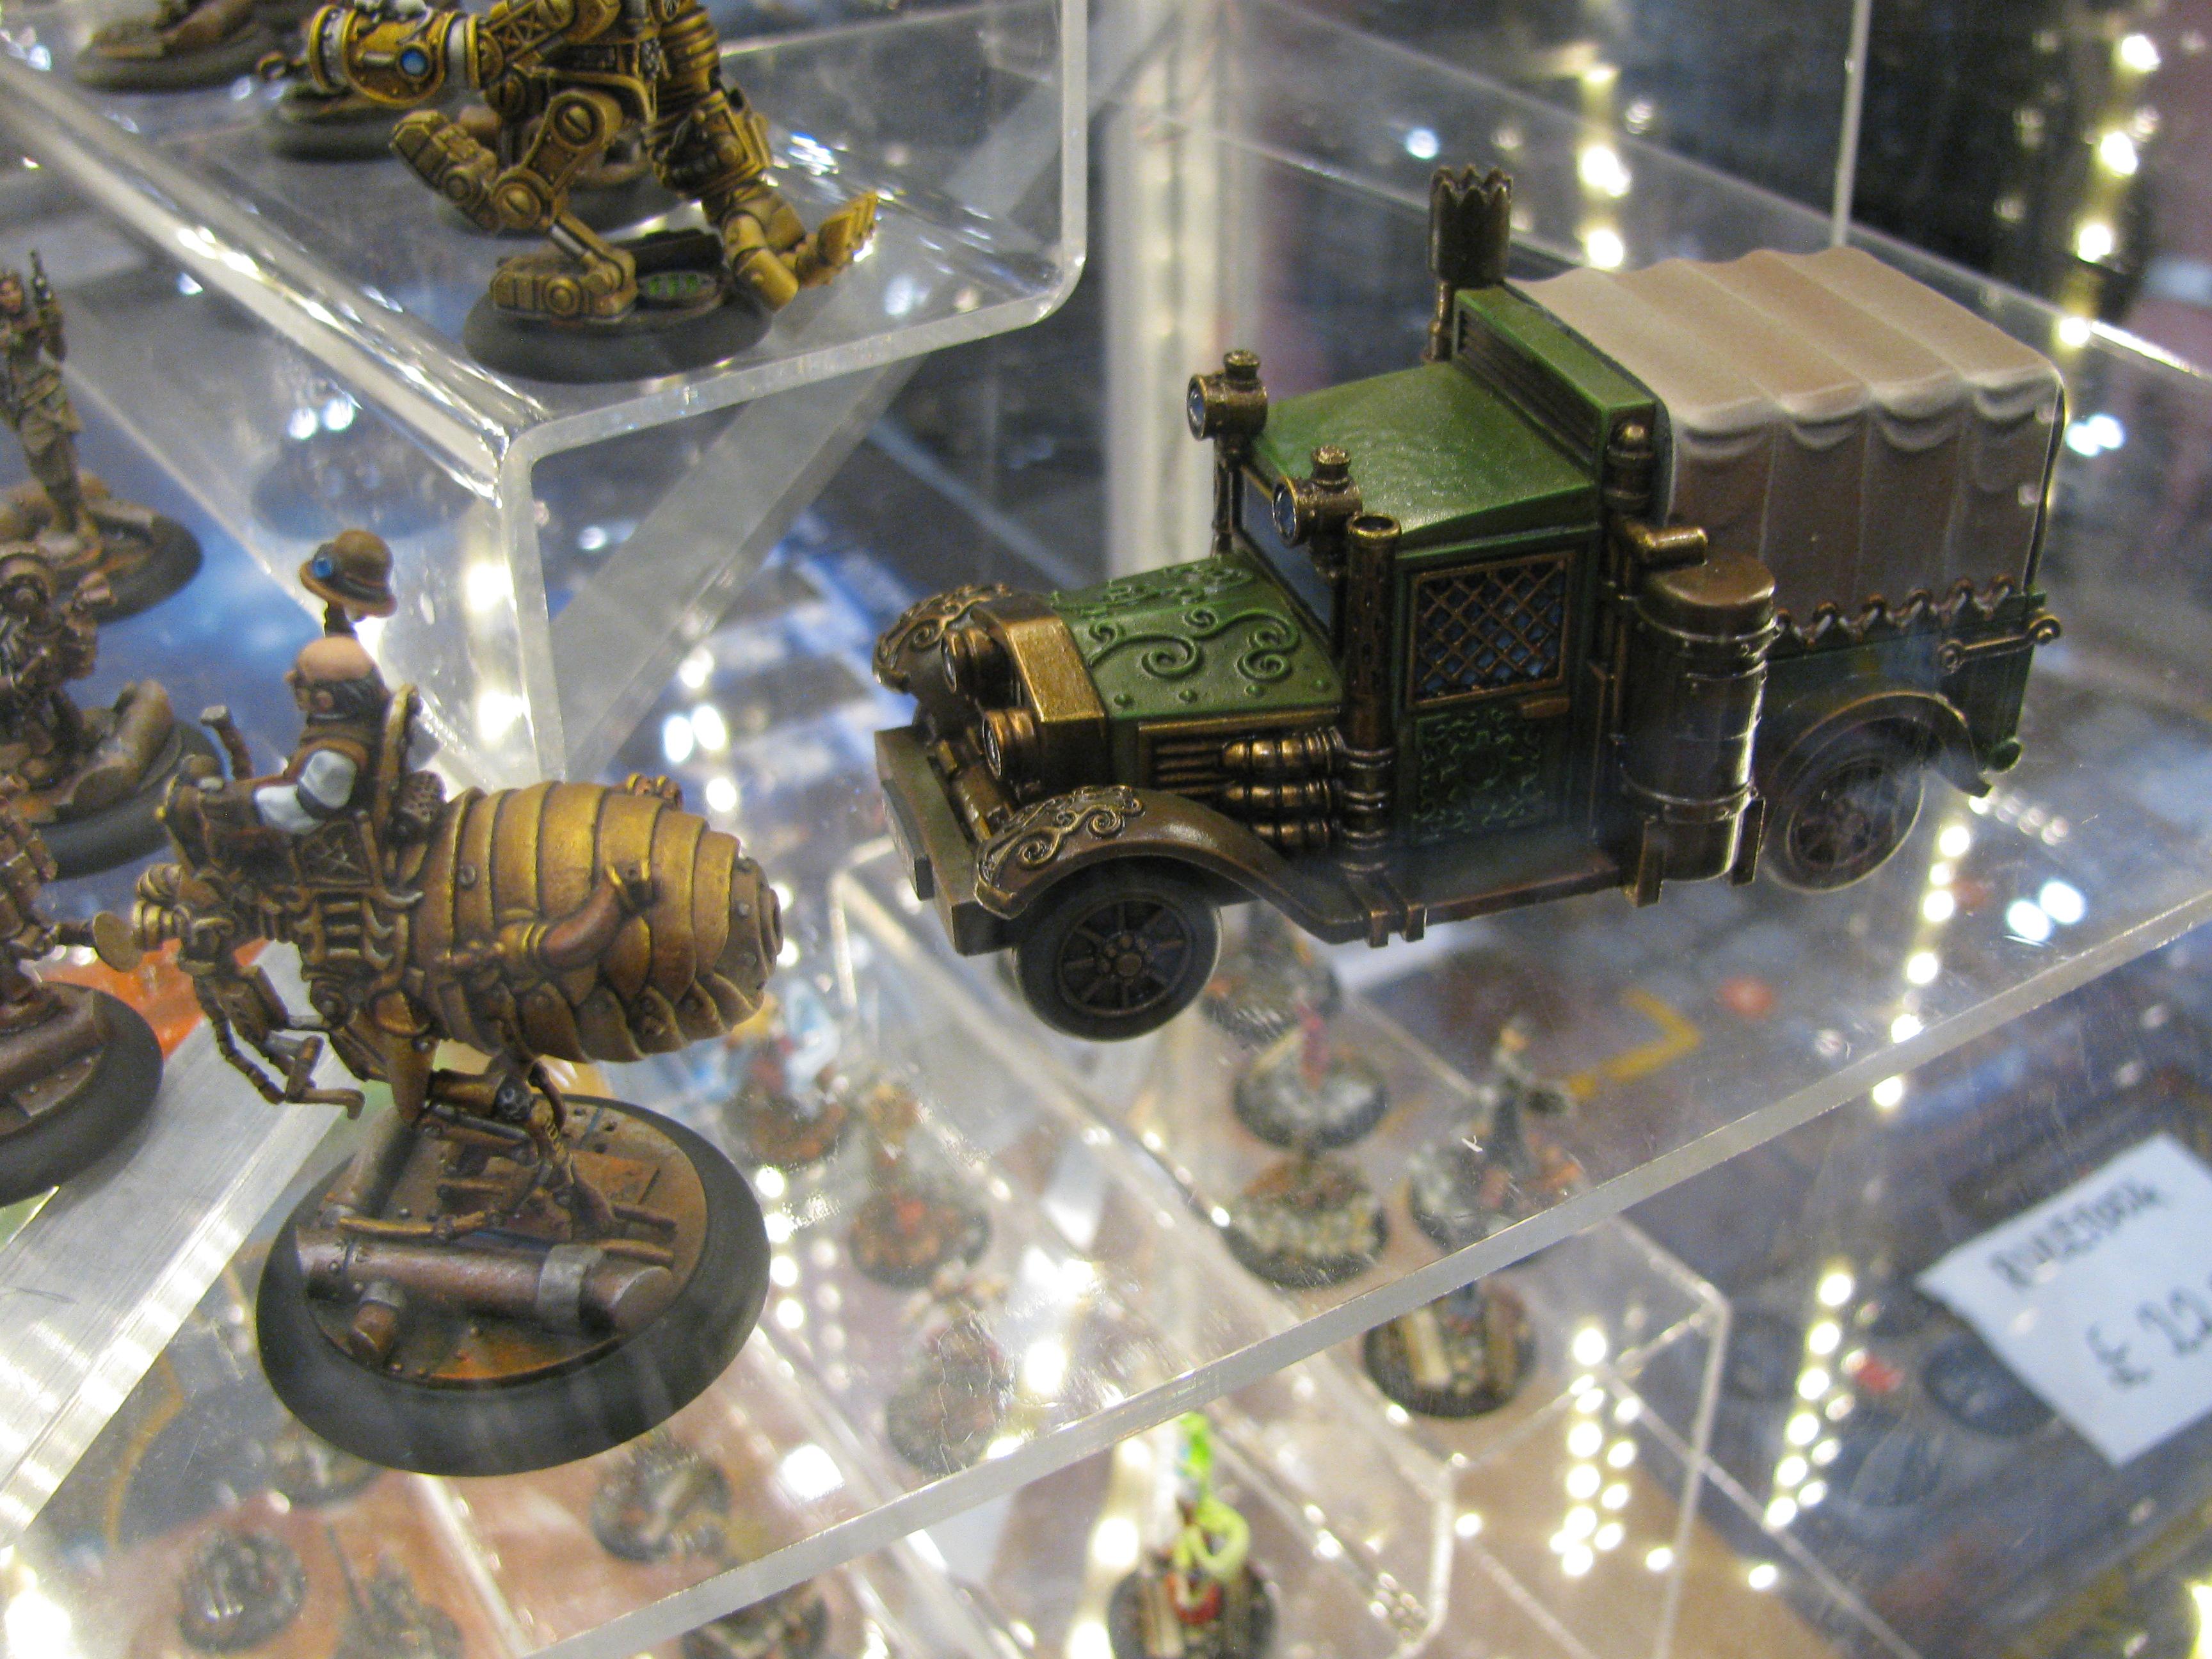 Convention, Exhibiton, Gaming, Not My Work, Salute, Show, Steampunk, Truck